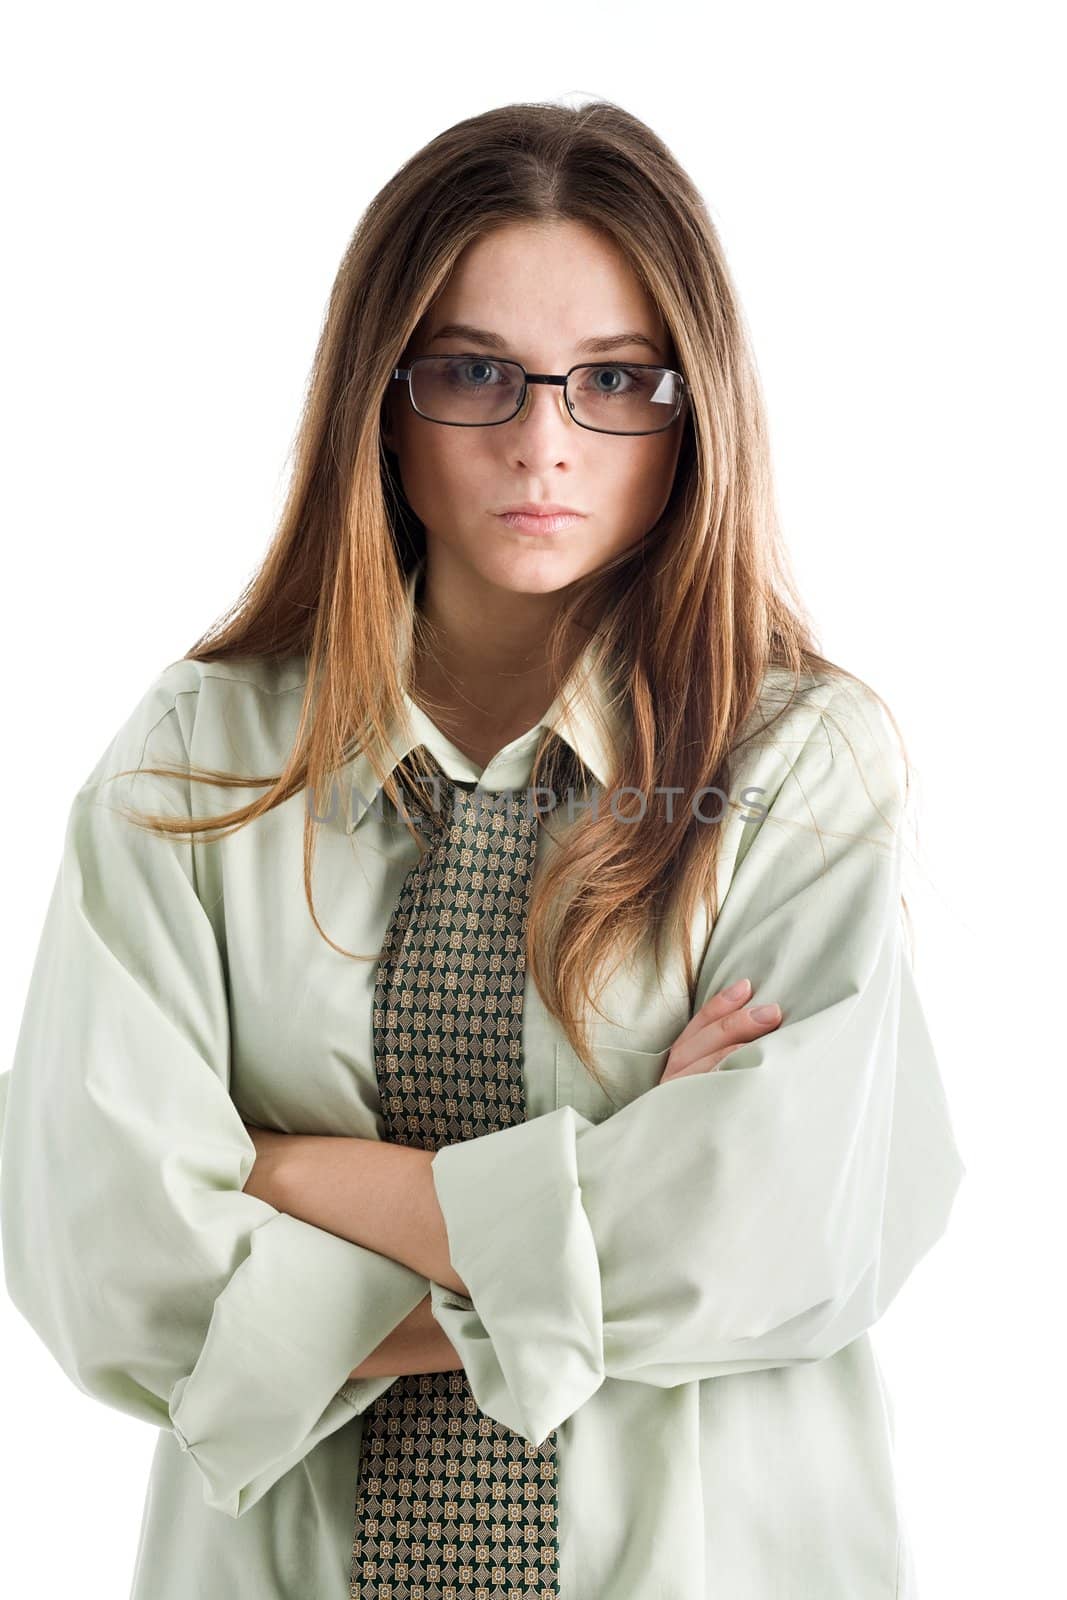 An image of a young girl in glasses